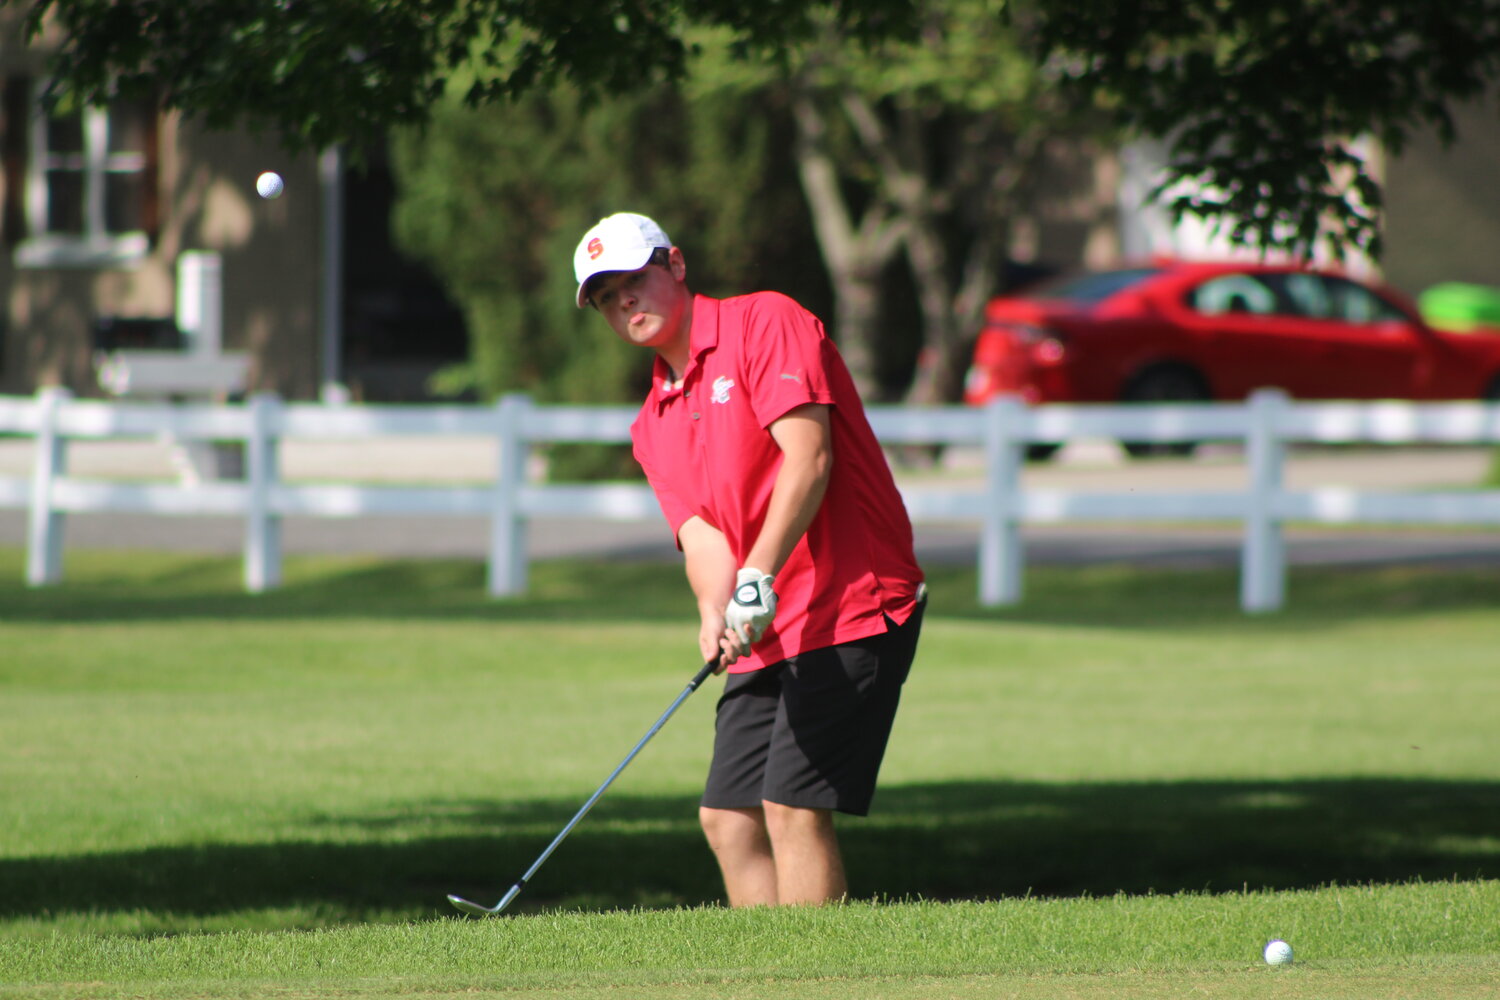 Senior Nolan Allen chips a shot onto the green during the County Meet. Allen fired an 83 to help the Mounties clinch the county title.